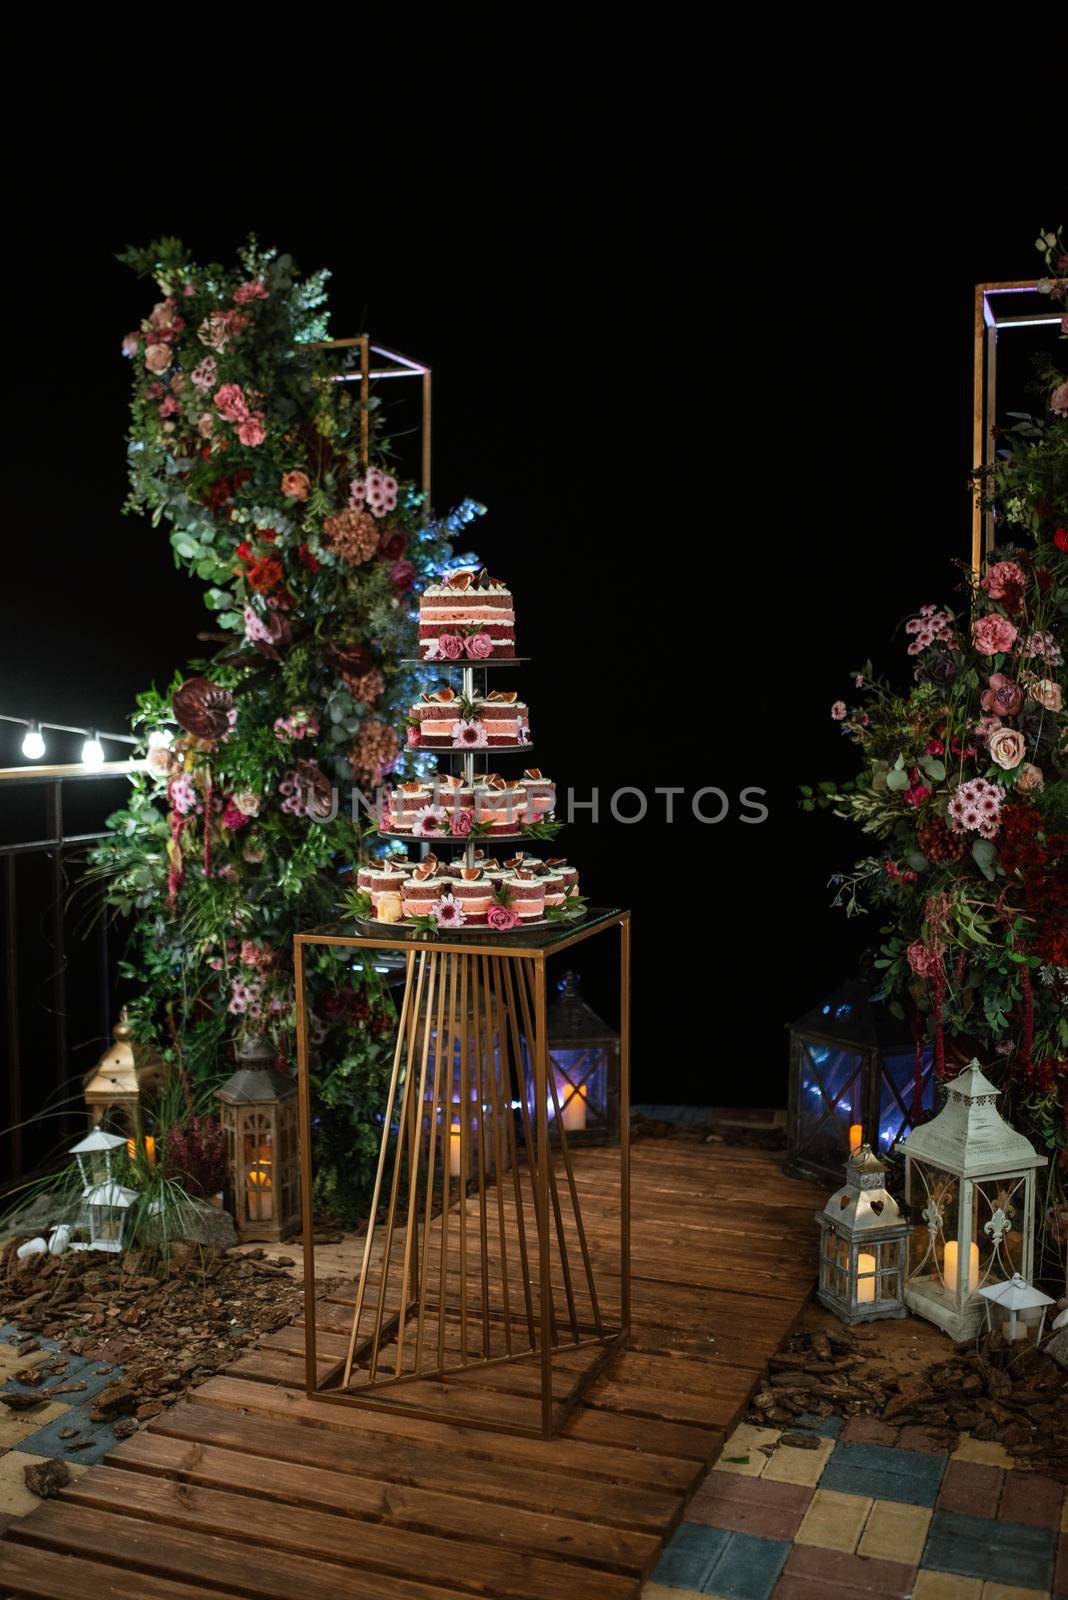 wedding cake at the wedding by Andreua